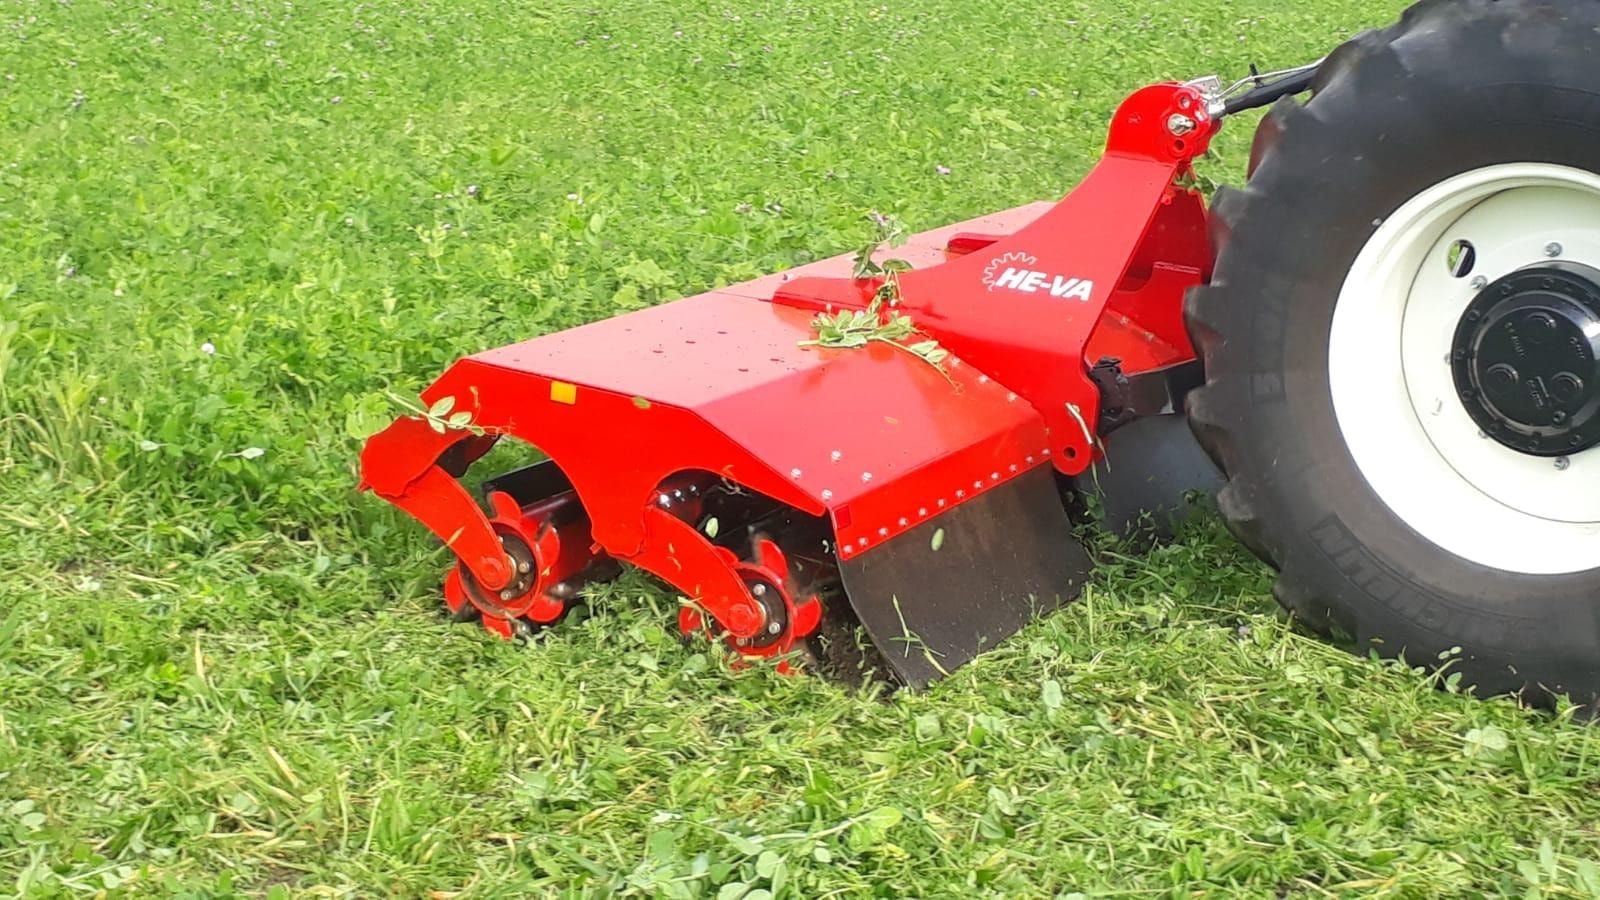 OPICO to launch HE-VA’s Top Cutter Solo at Cereals Event 2021